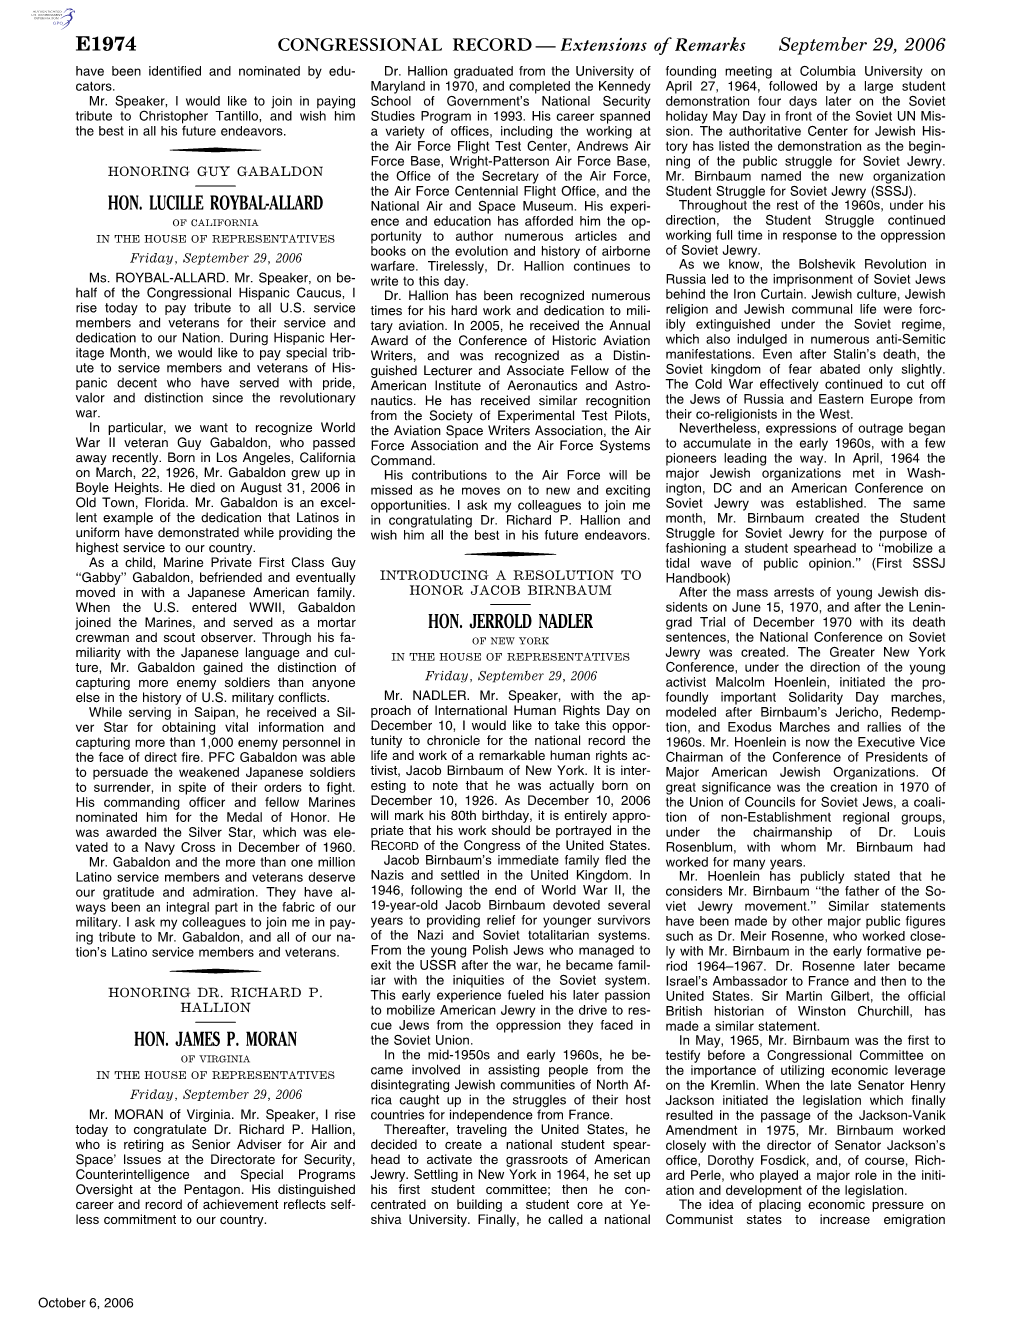 CONGRESSIONAL RECORD— Extensions of Remarks E1974 HON